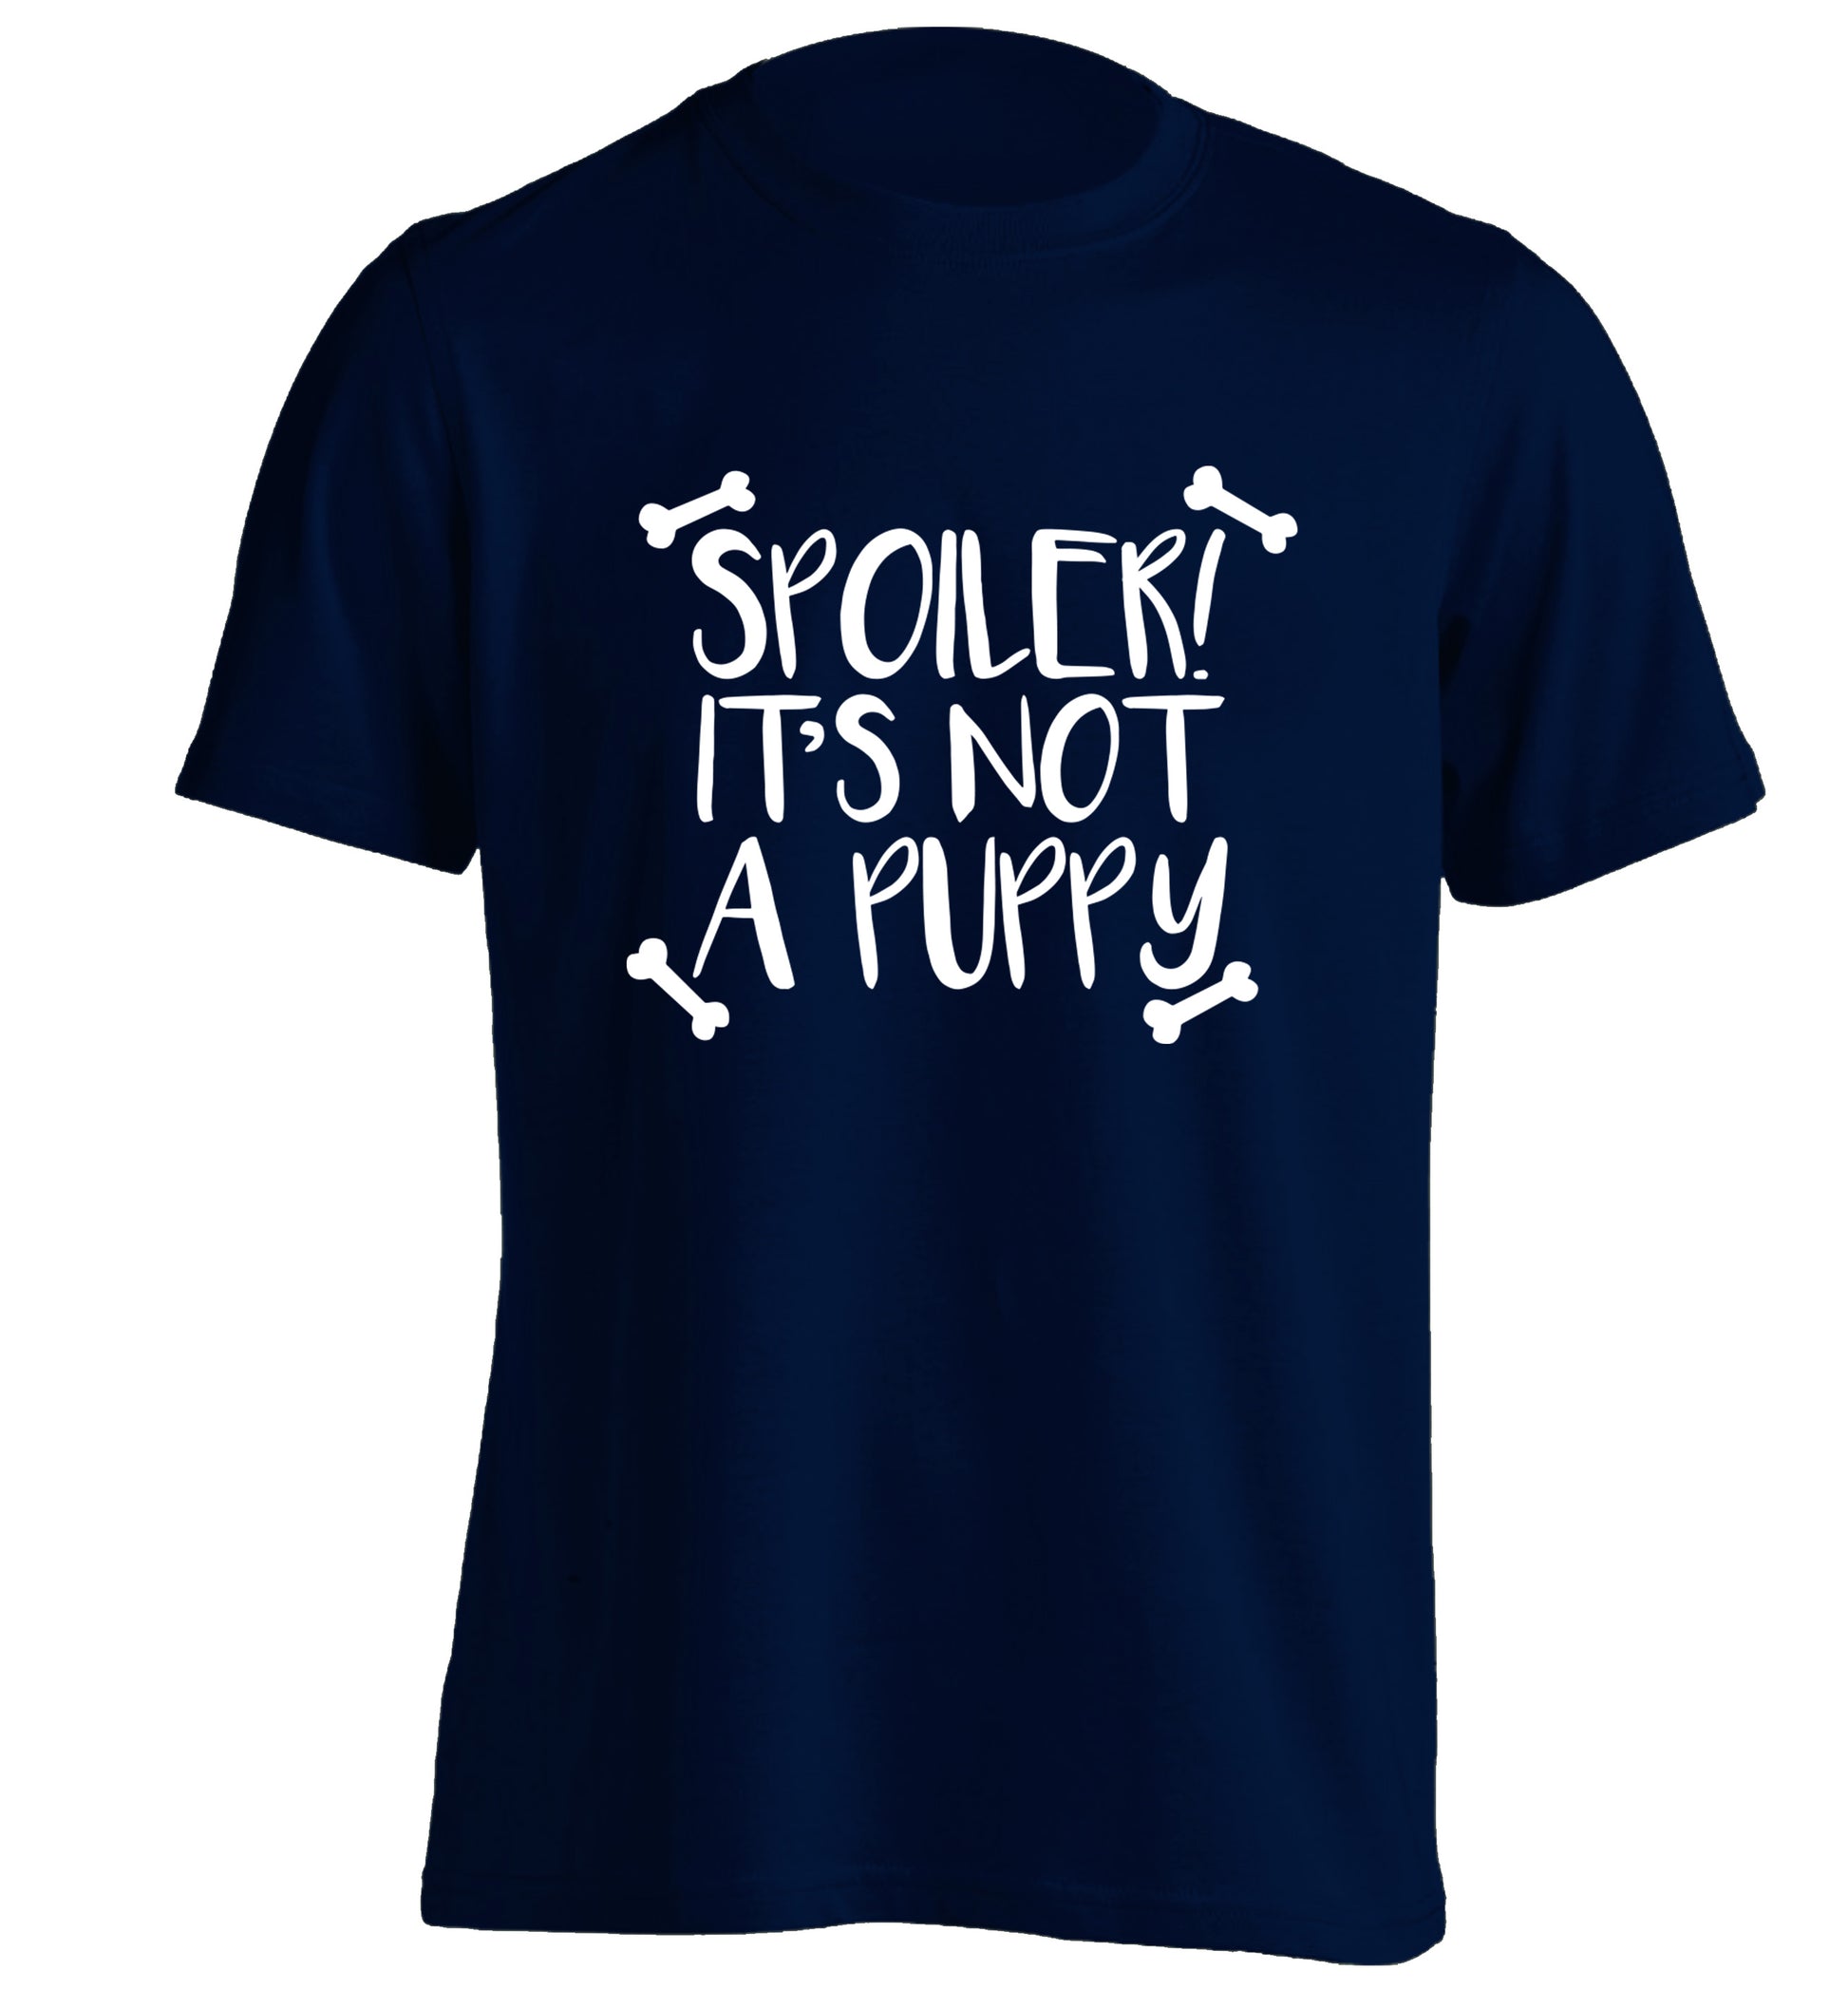 Spoiler it's not a puppy adults unisex navy Tshirt 2XL